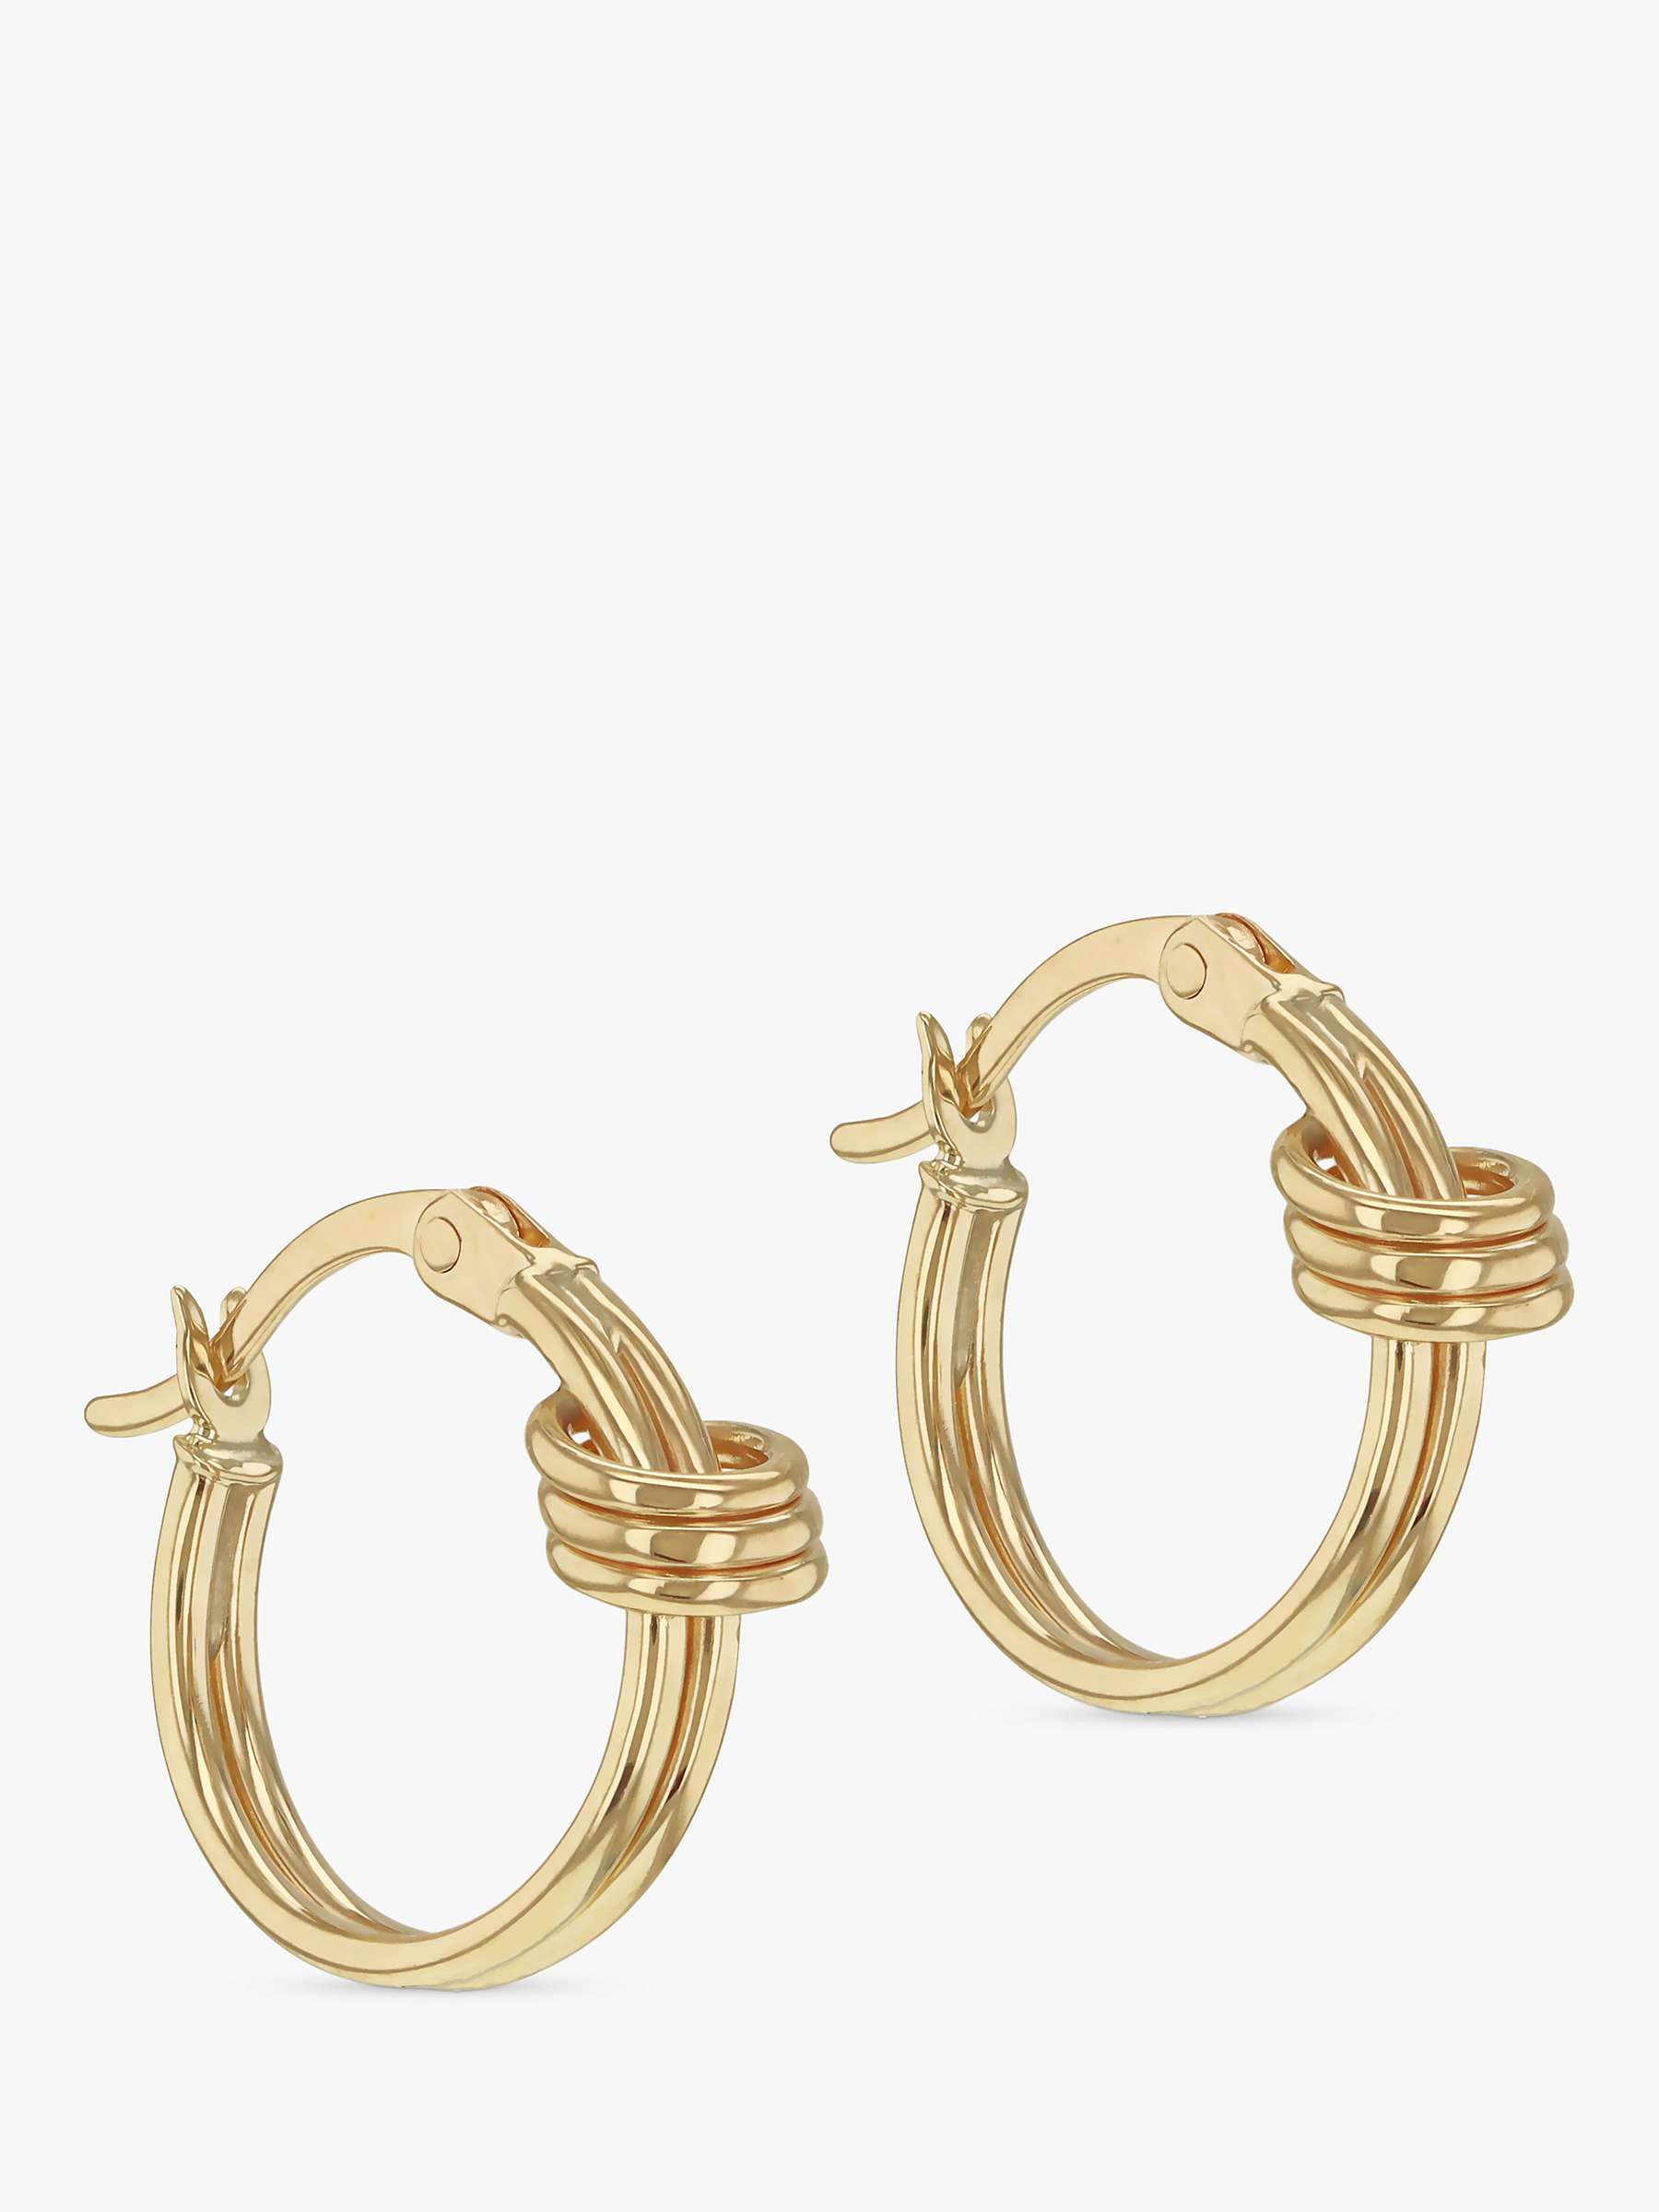 Buy IBB 9ct Gold Double Love Knot Hoop Earrings, Gold Online at johnlewis.com